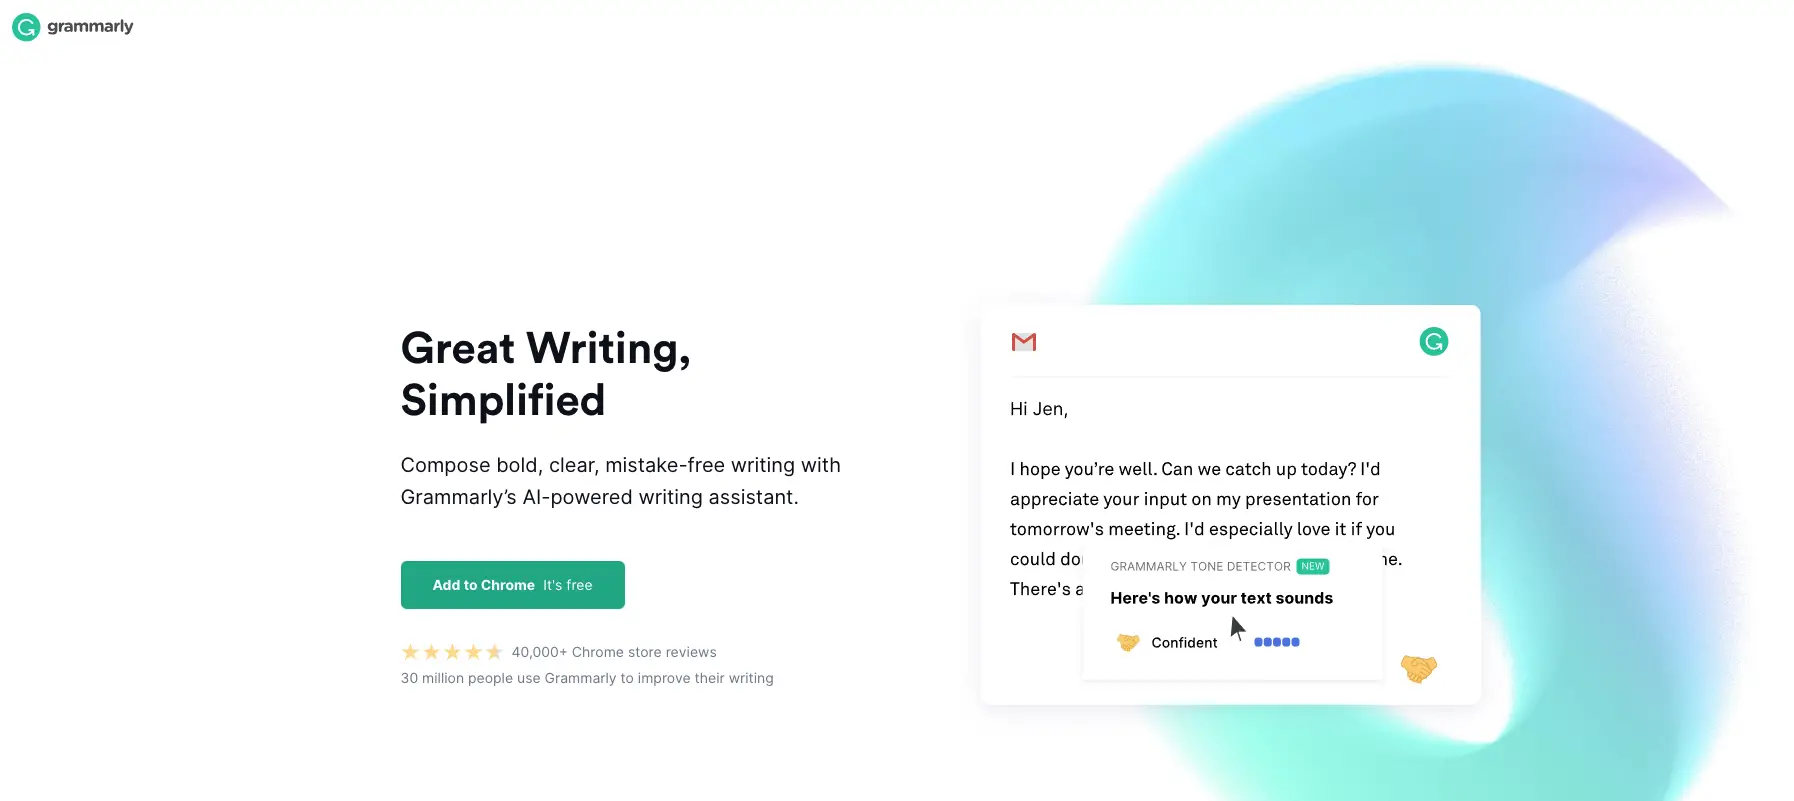 grammarly for bloggers swatisjournal